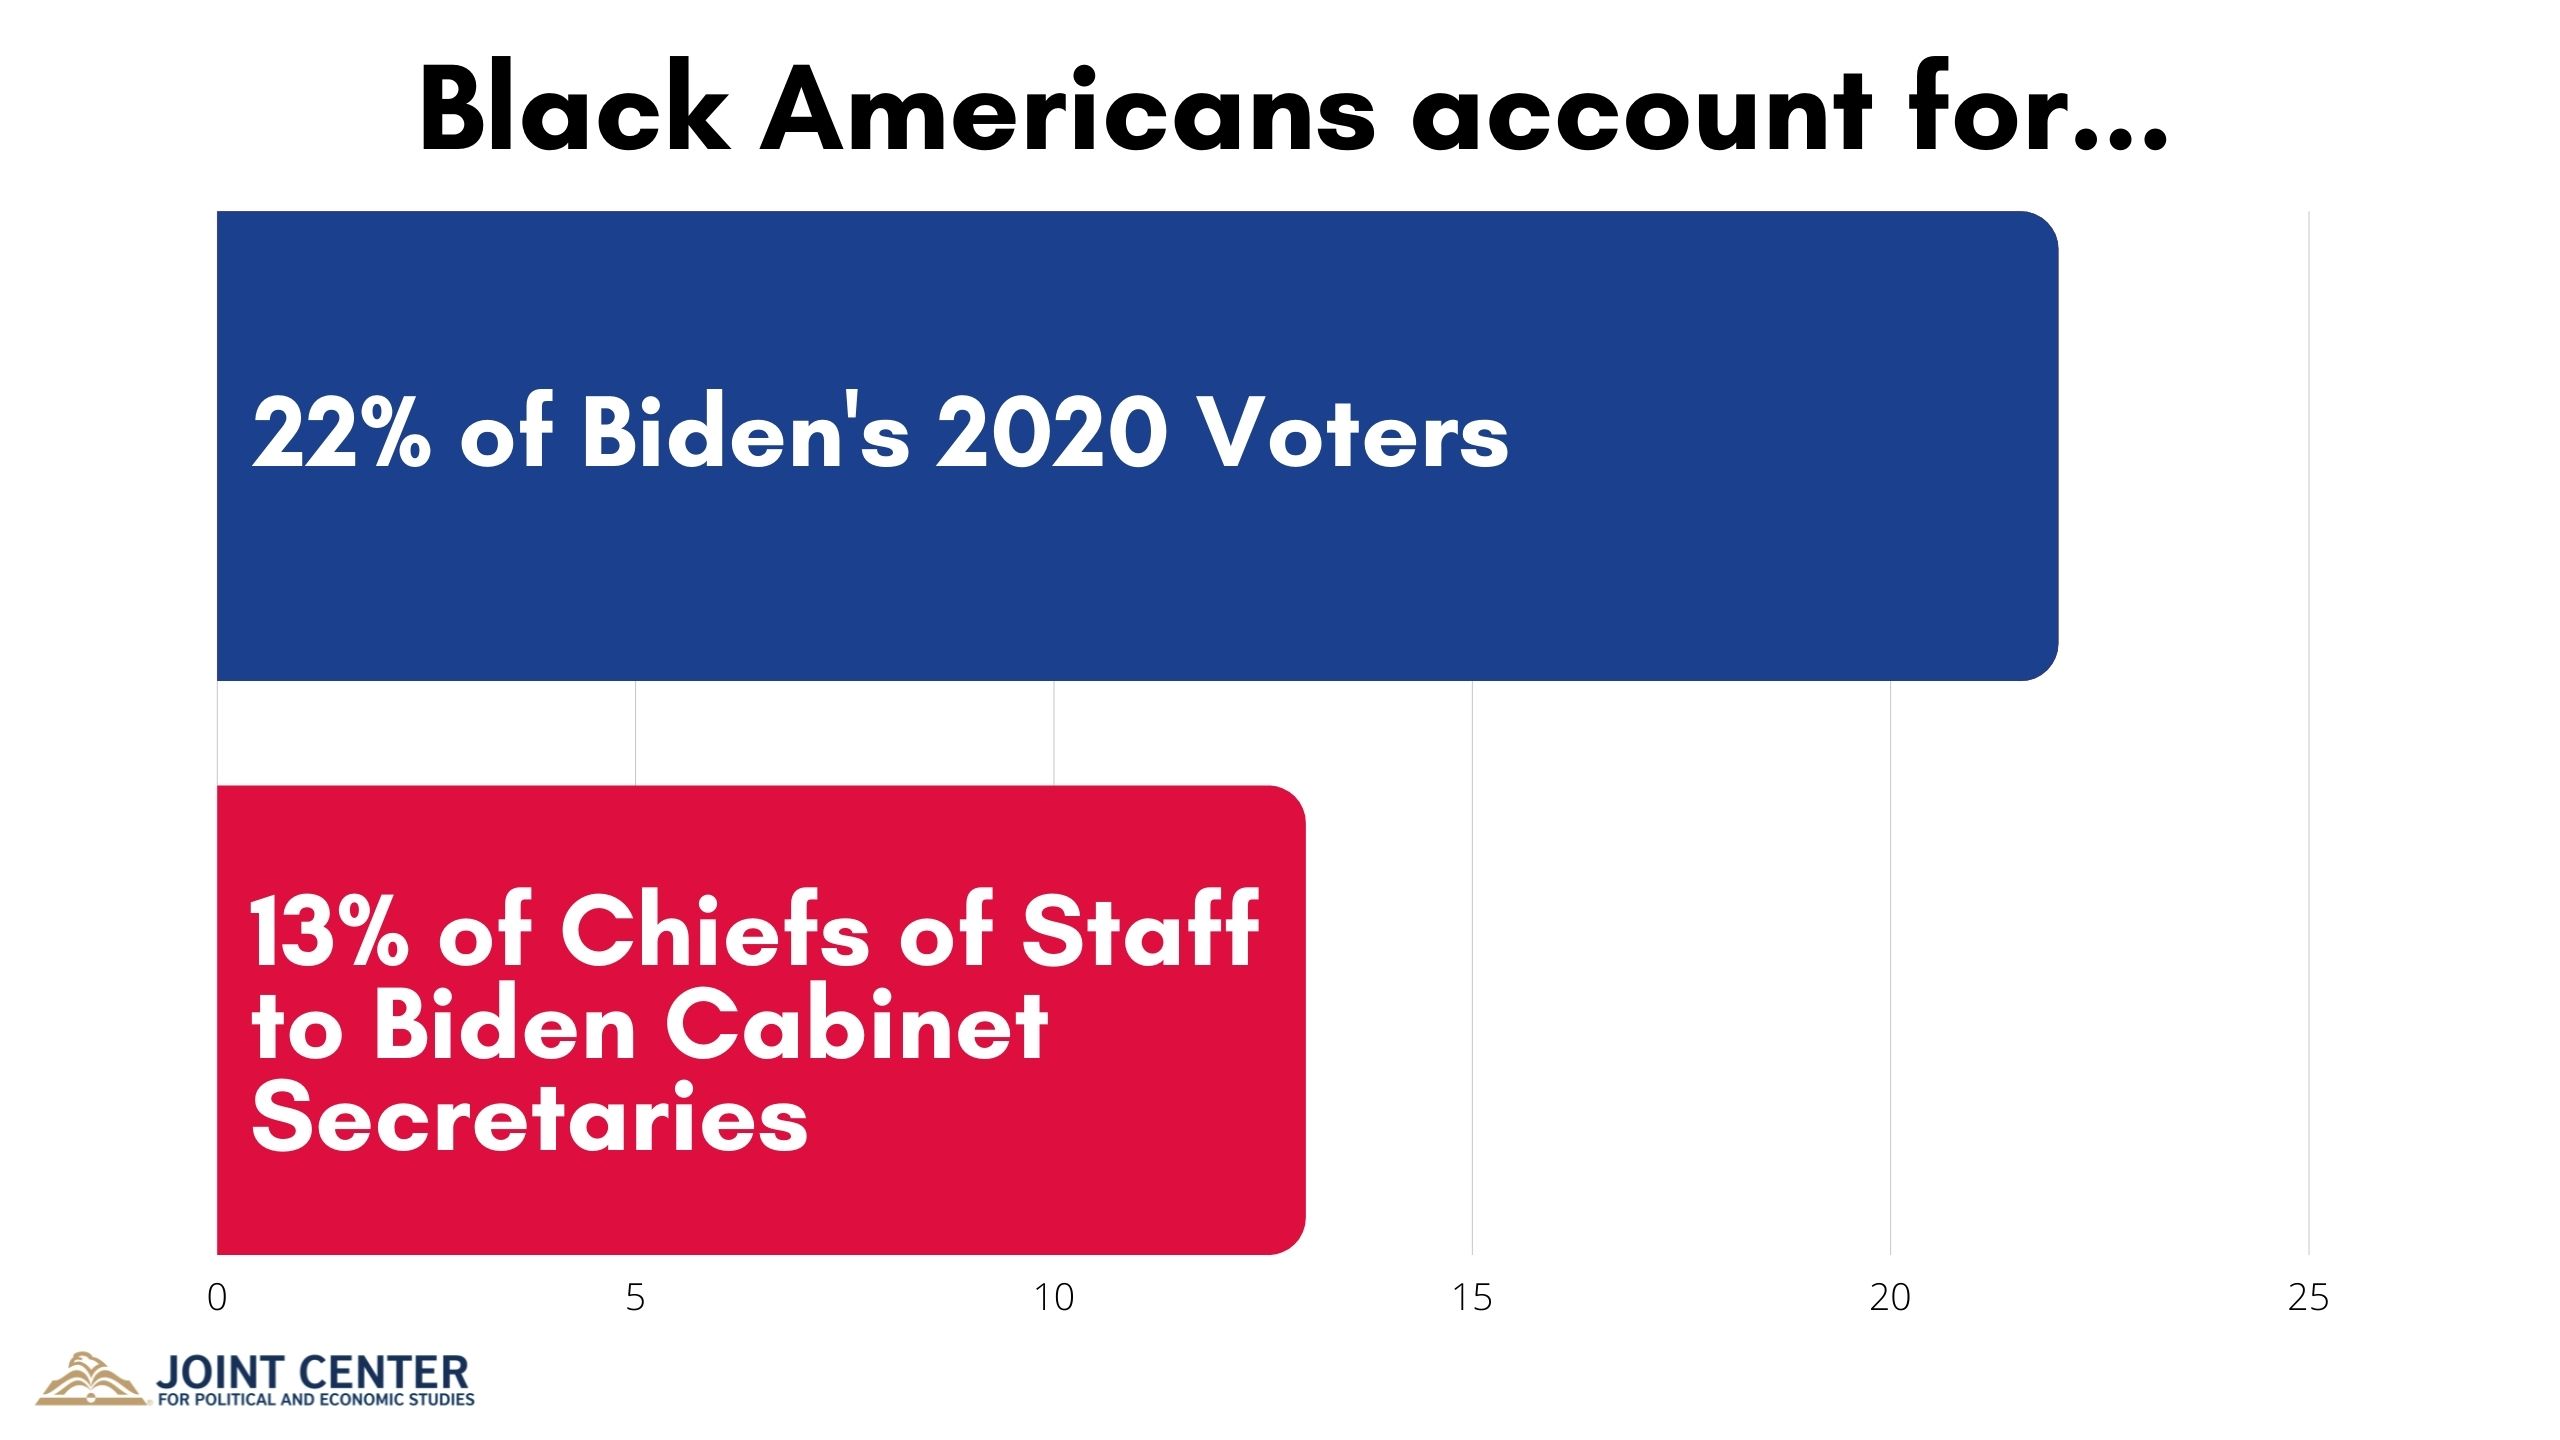 Black Americans account for 22 percent of Biden's 2020 Voters and 13 percent of Chiefs of Staff to Biden Cabinet Secretaries.